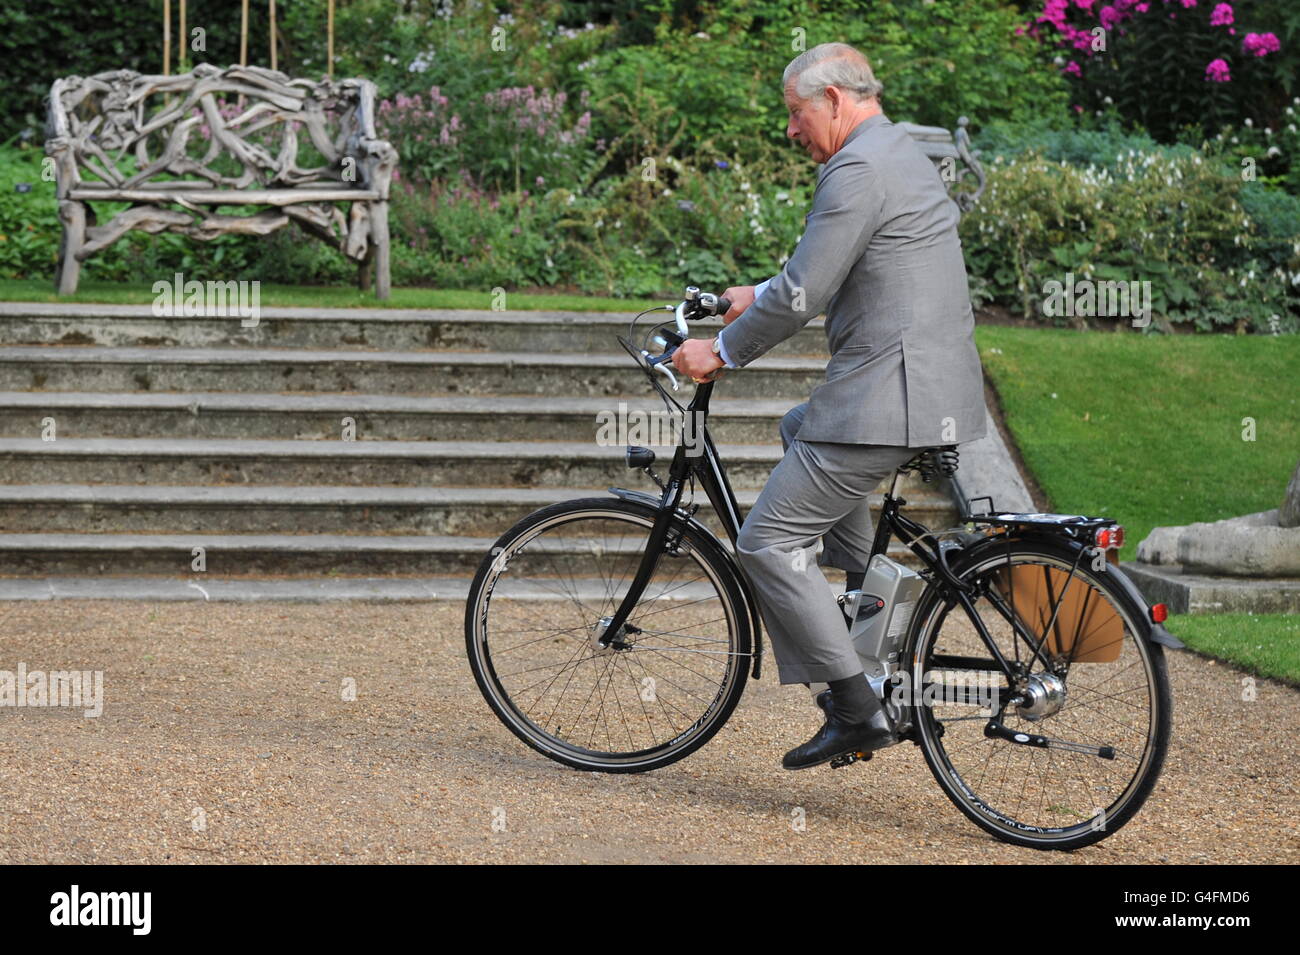 The Prince of Wales rides an electric bicycle during the Start Garden Exhibition and Pop-Up Restaurant at Clarence House in central London. PRESS ASSOCIATION Photo. Picture date: Wednesday July 27, 2011. See PA story ROYAL Charles. Photo credit should read: Ben Stansall/PA Wire Stock Photo